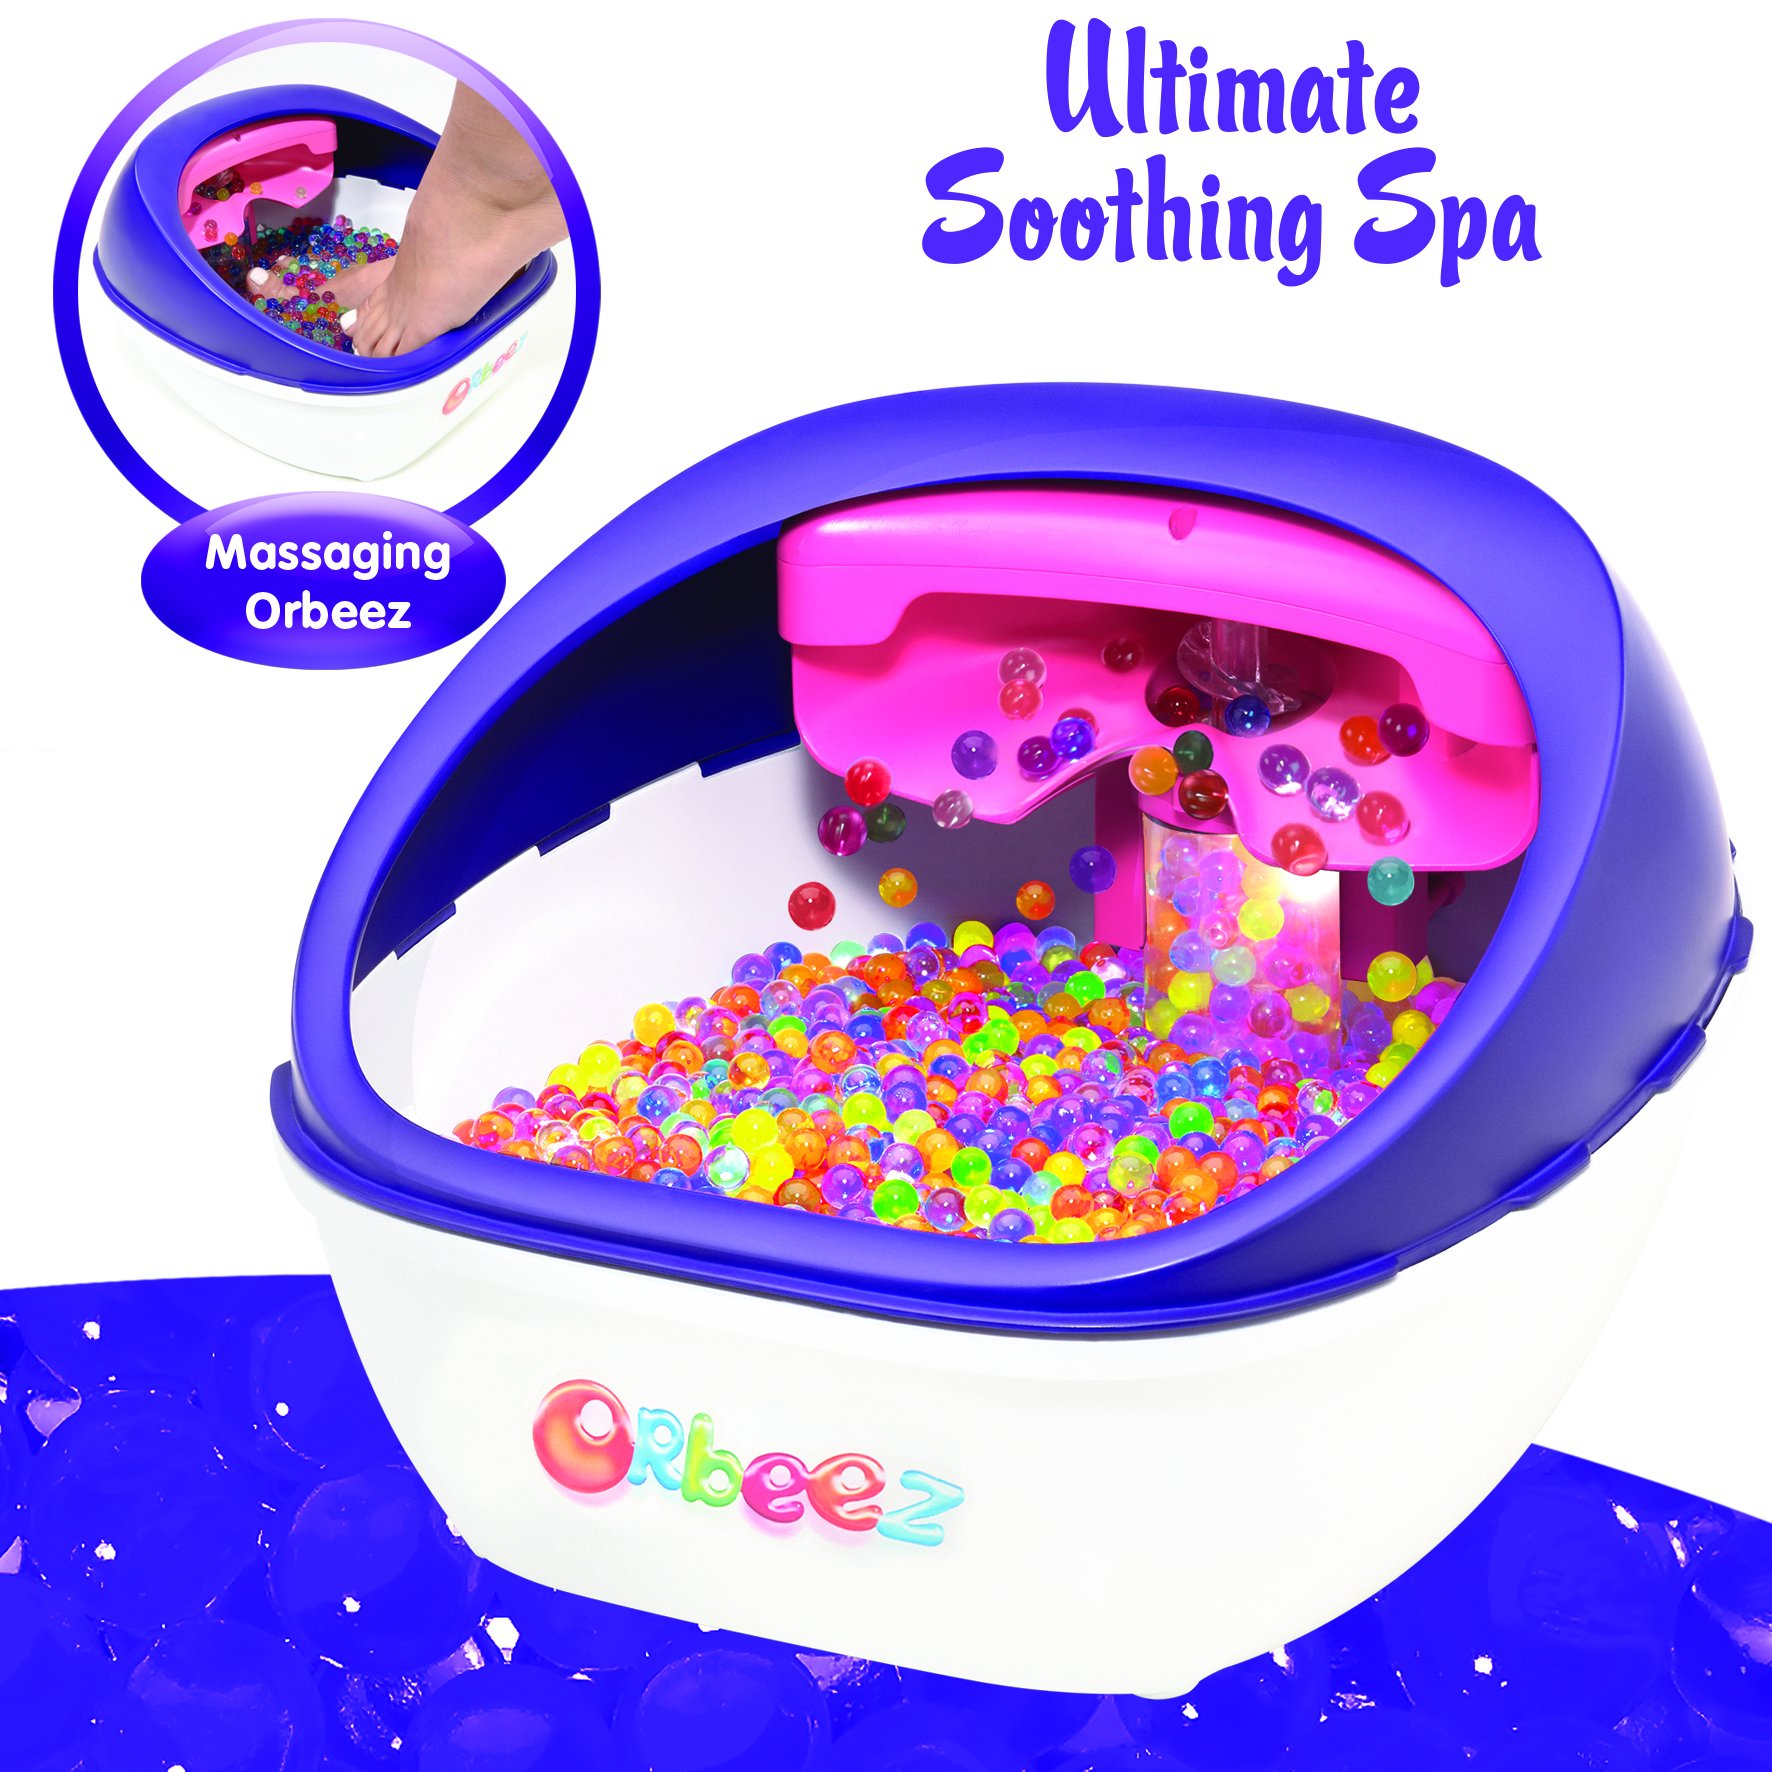 Foot spa Machines are great gift ideas for women